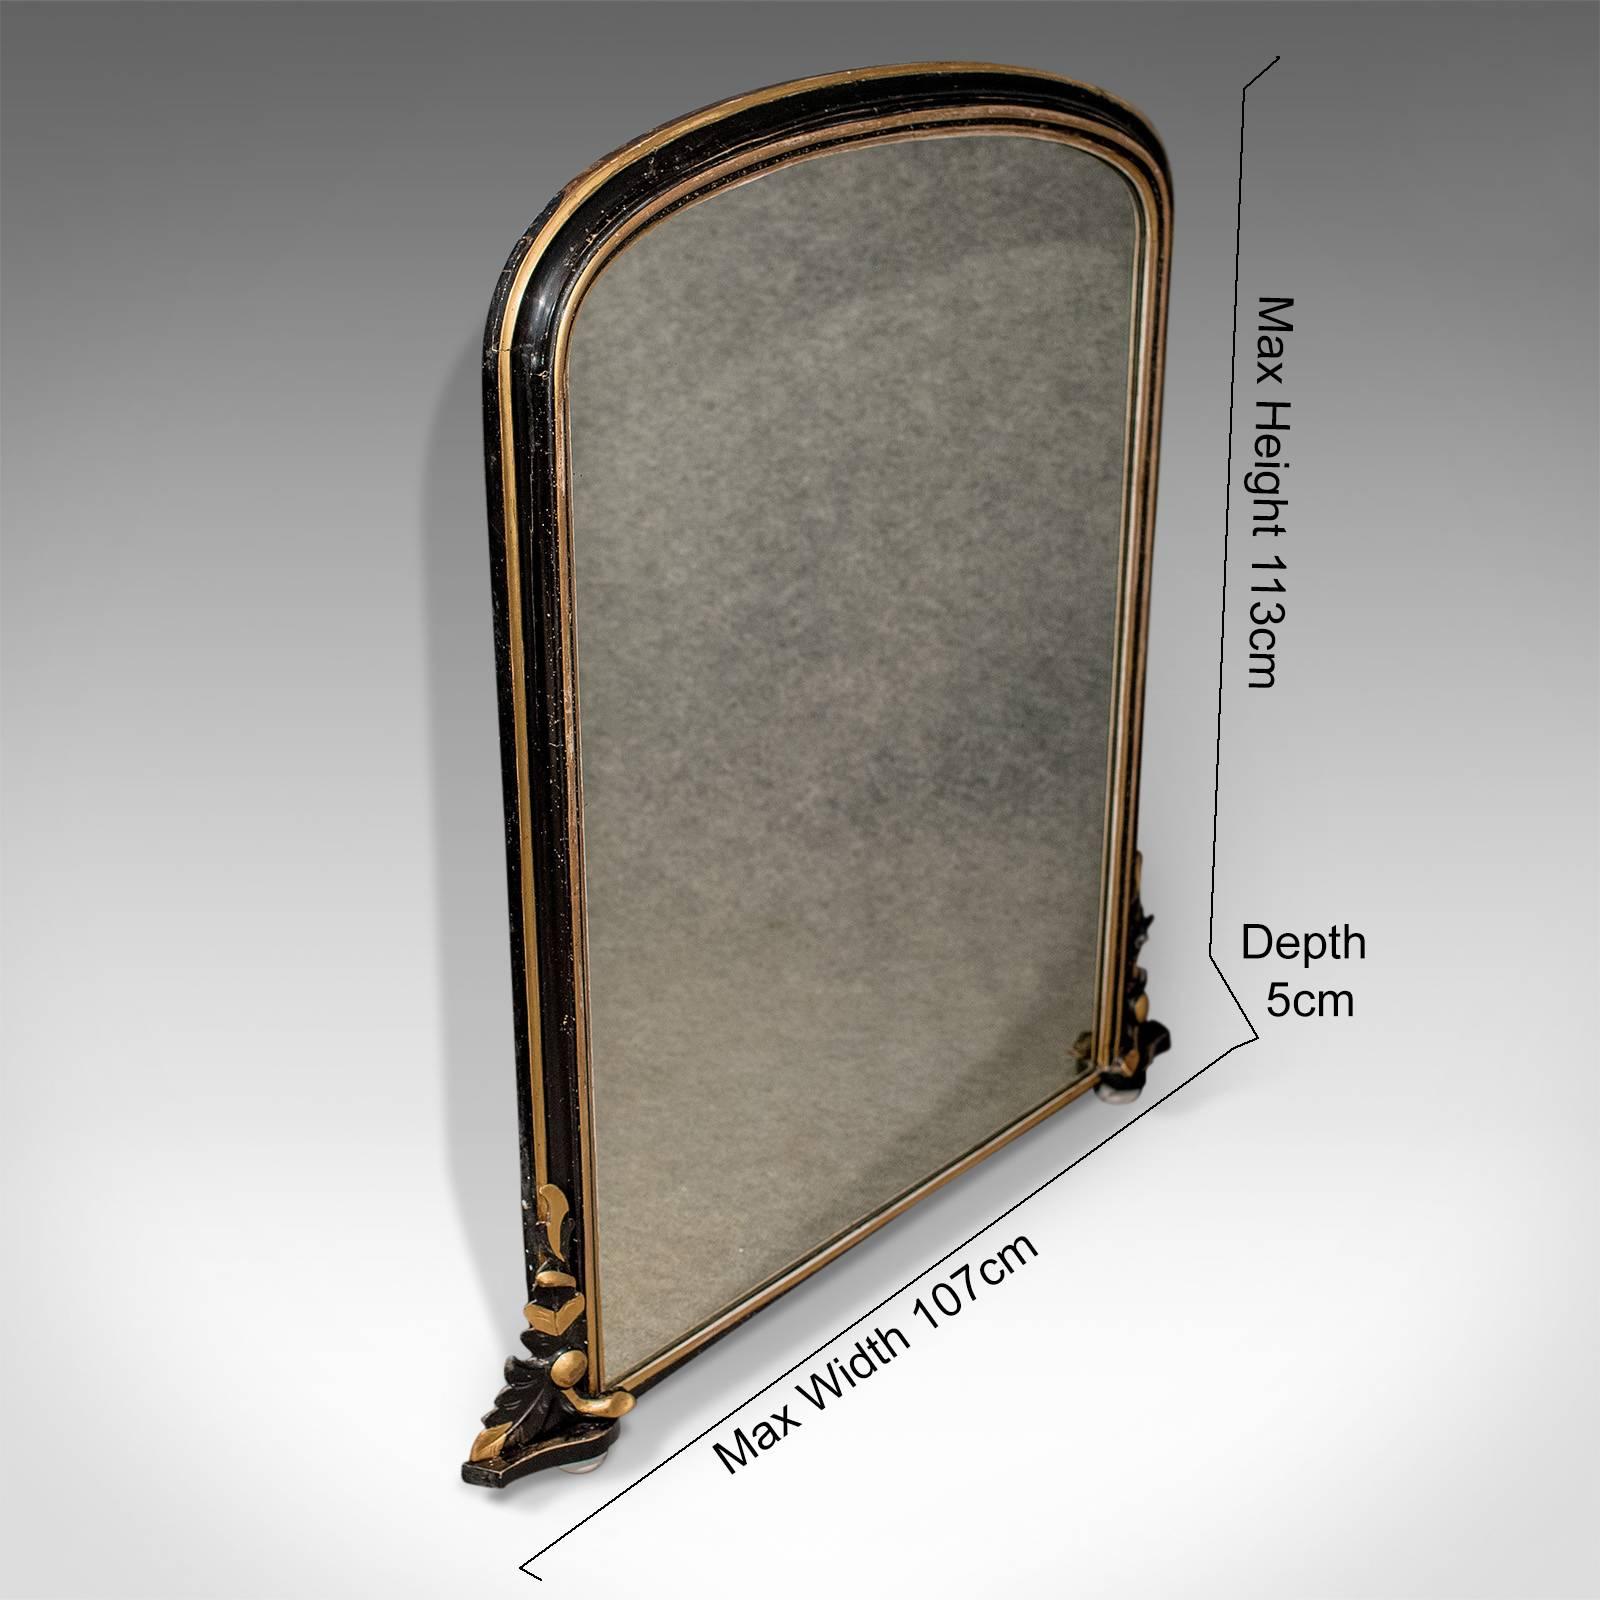 This is a Regency antique overmantel mirror in an ebonized giltwood frame dating to the early 19th century, circa 1820.

Highly desirable ebonized color and patina to the giltwood frame
Superb proportions in classical form
Quality hand-carved